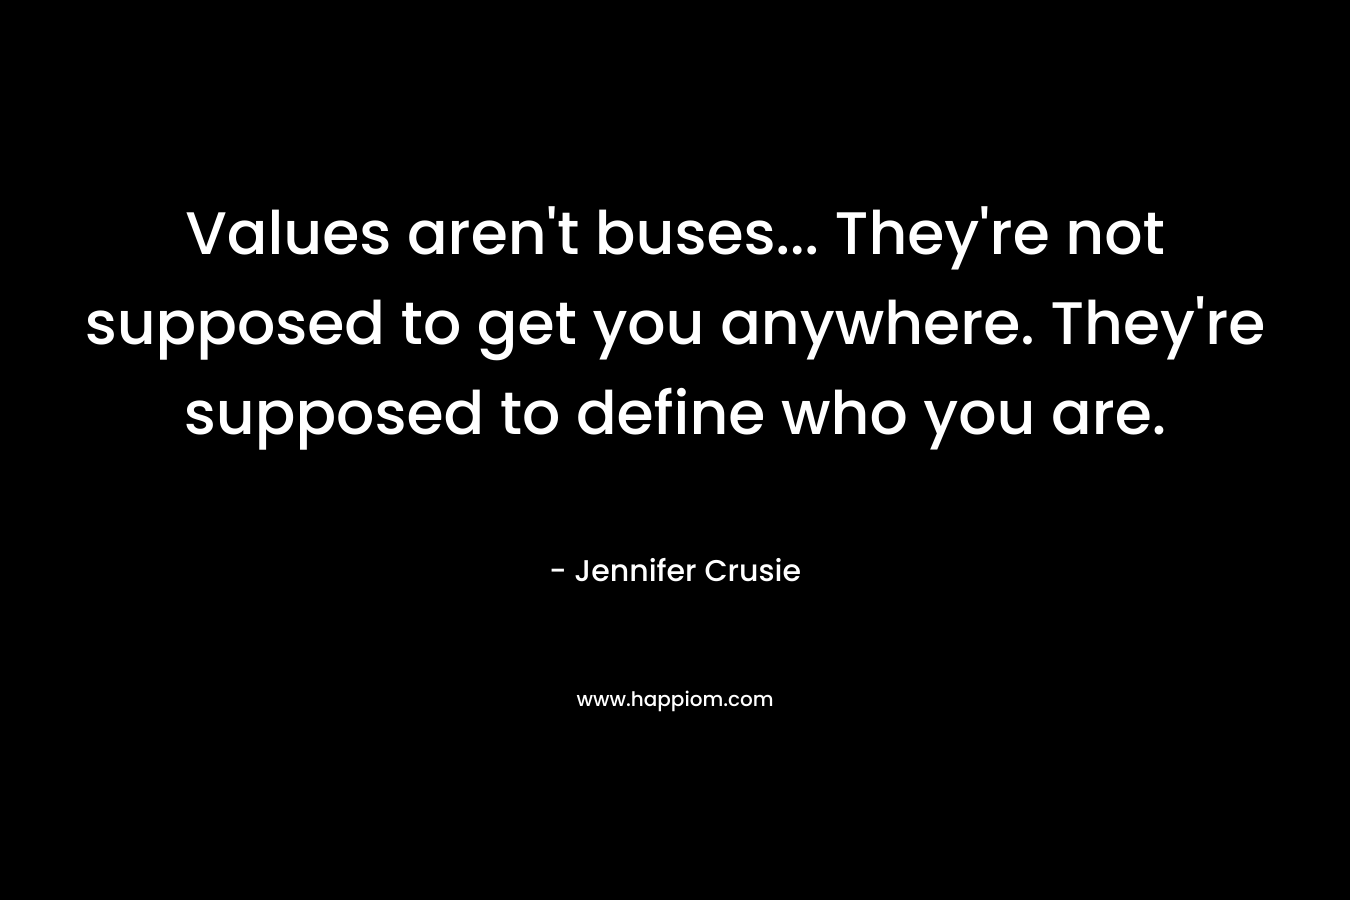 Values aren't buses... They're not supposed to get you anywhere. They're supposed to define who you are.